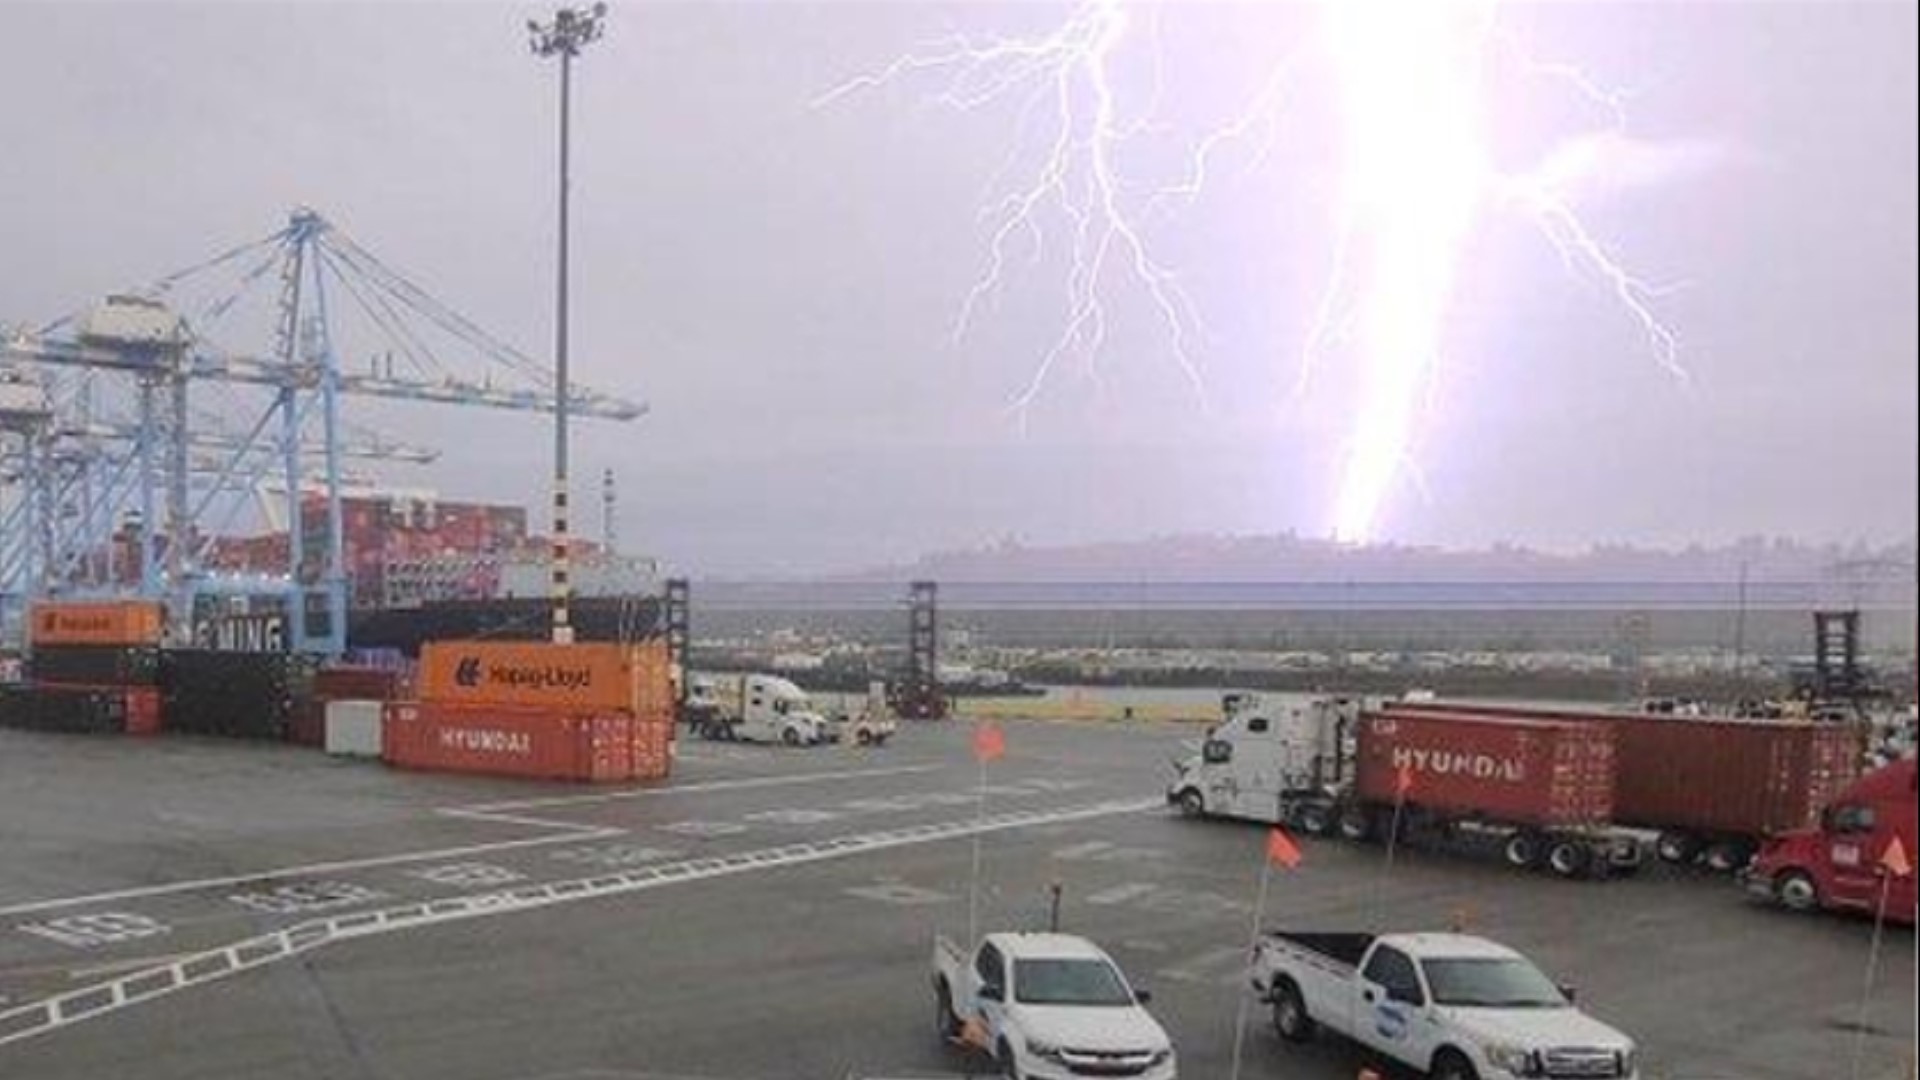 The National Weather Service issued a Red Flag Warning for parts of western Washington Wednesday saying scattered lightning in dry areas could cause fires to start.